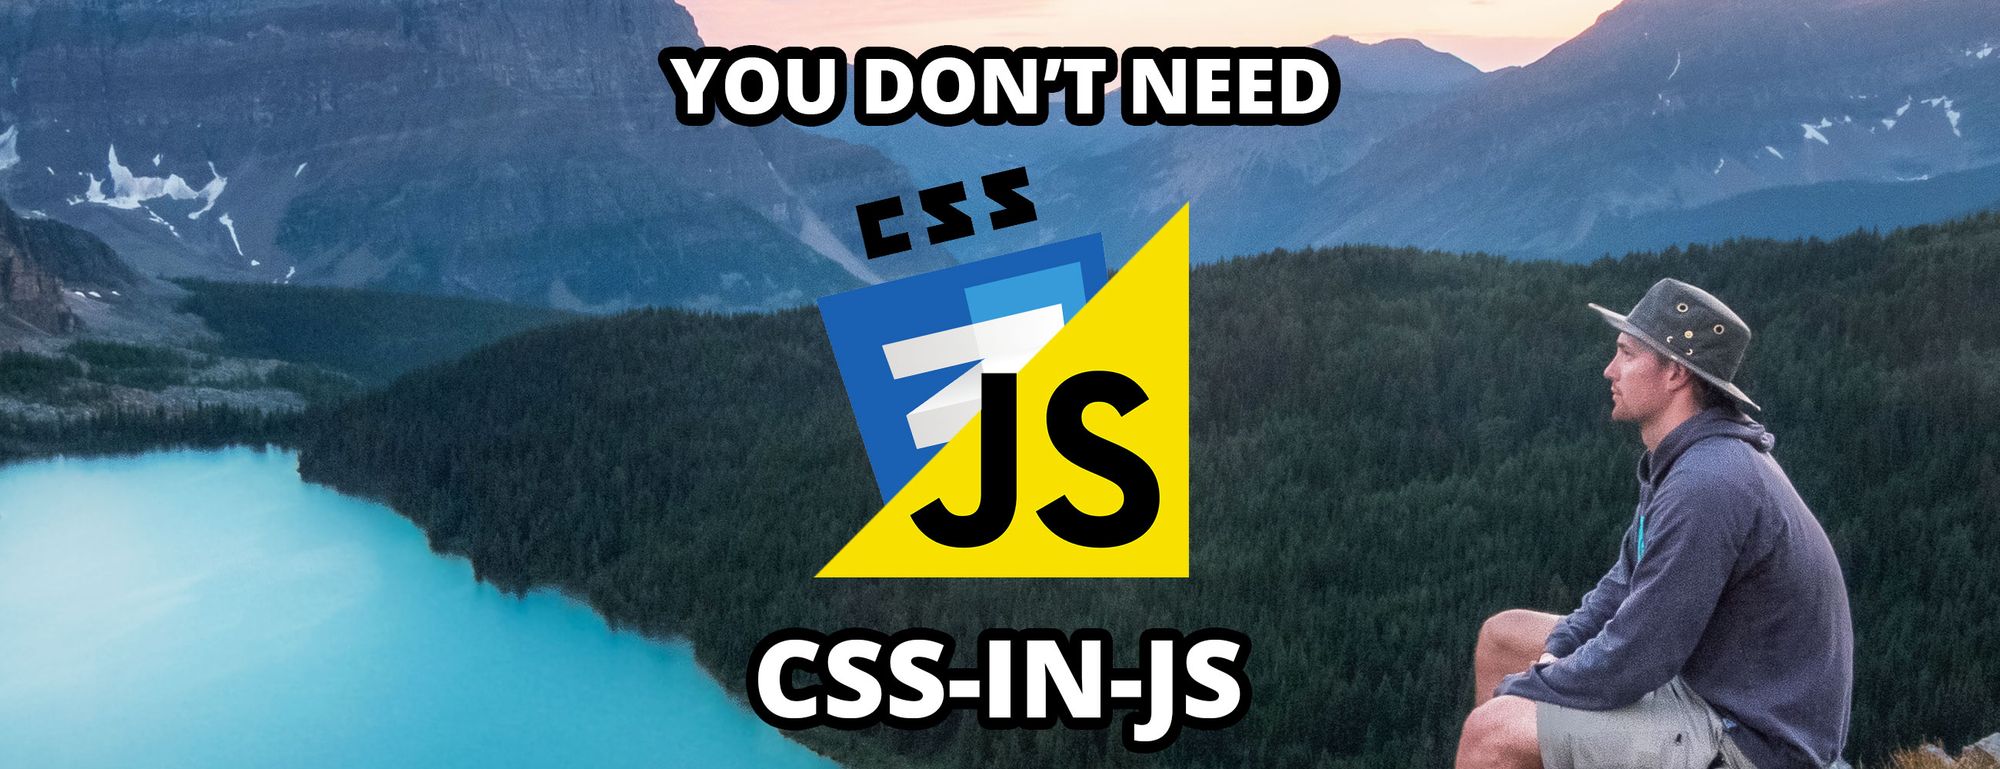 You Don't Need CSS-in-JS: Why (and When) I Use Stylesheets Instead